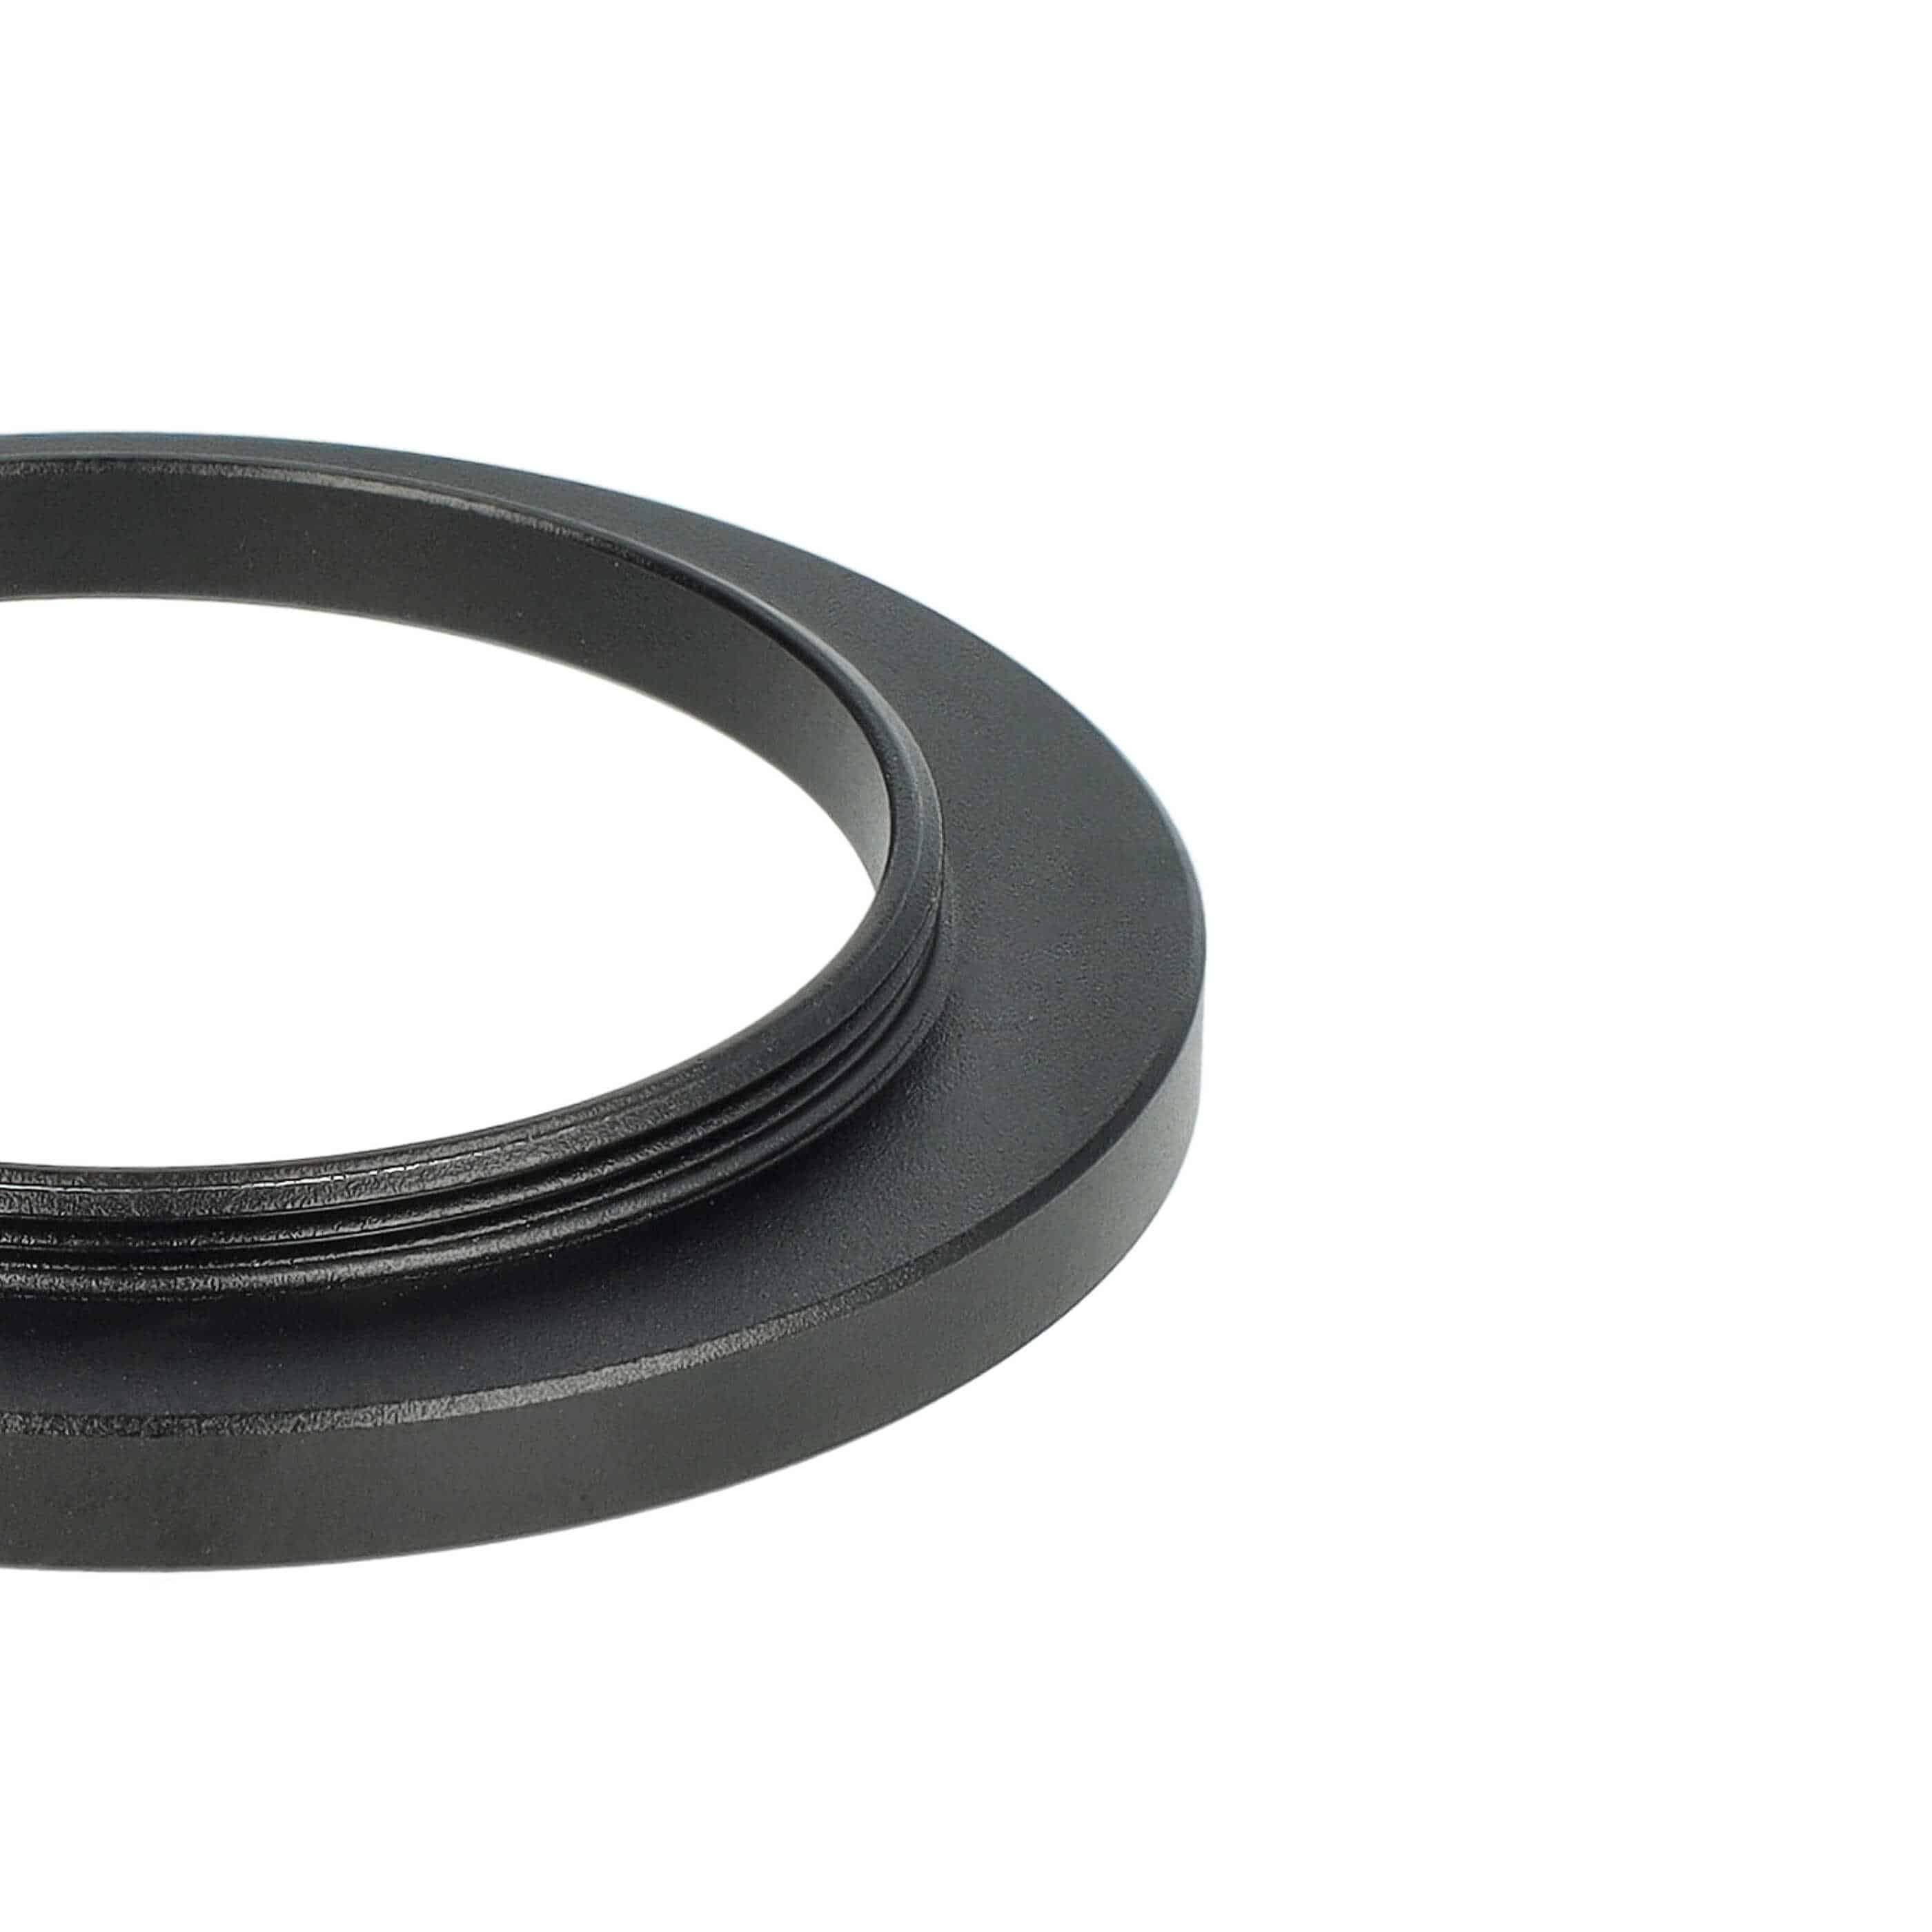 Step-Up Ring Adapter of 37 mm to 46 mmfor various Camera Lens - Filter Adapter